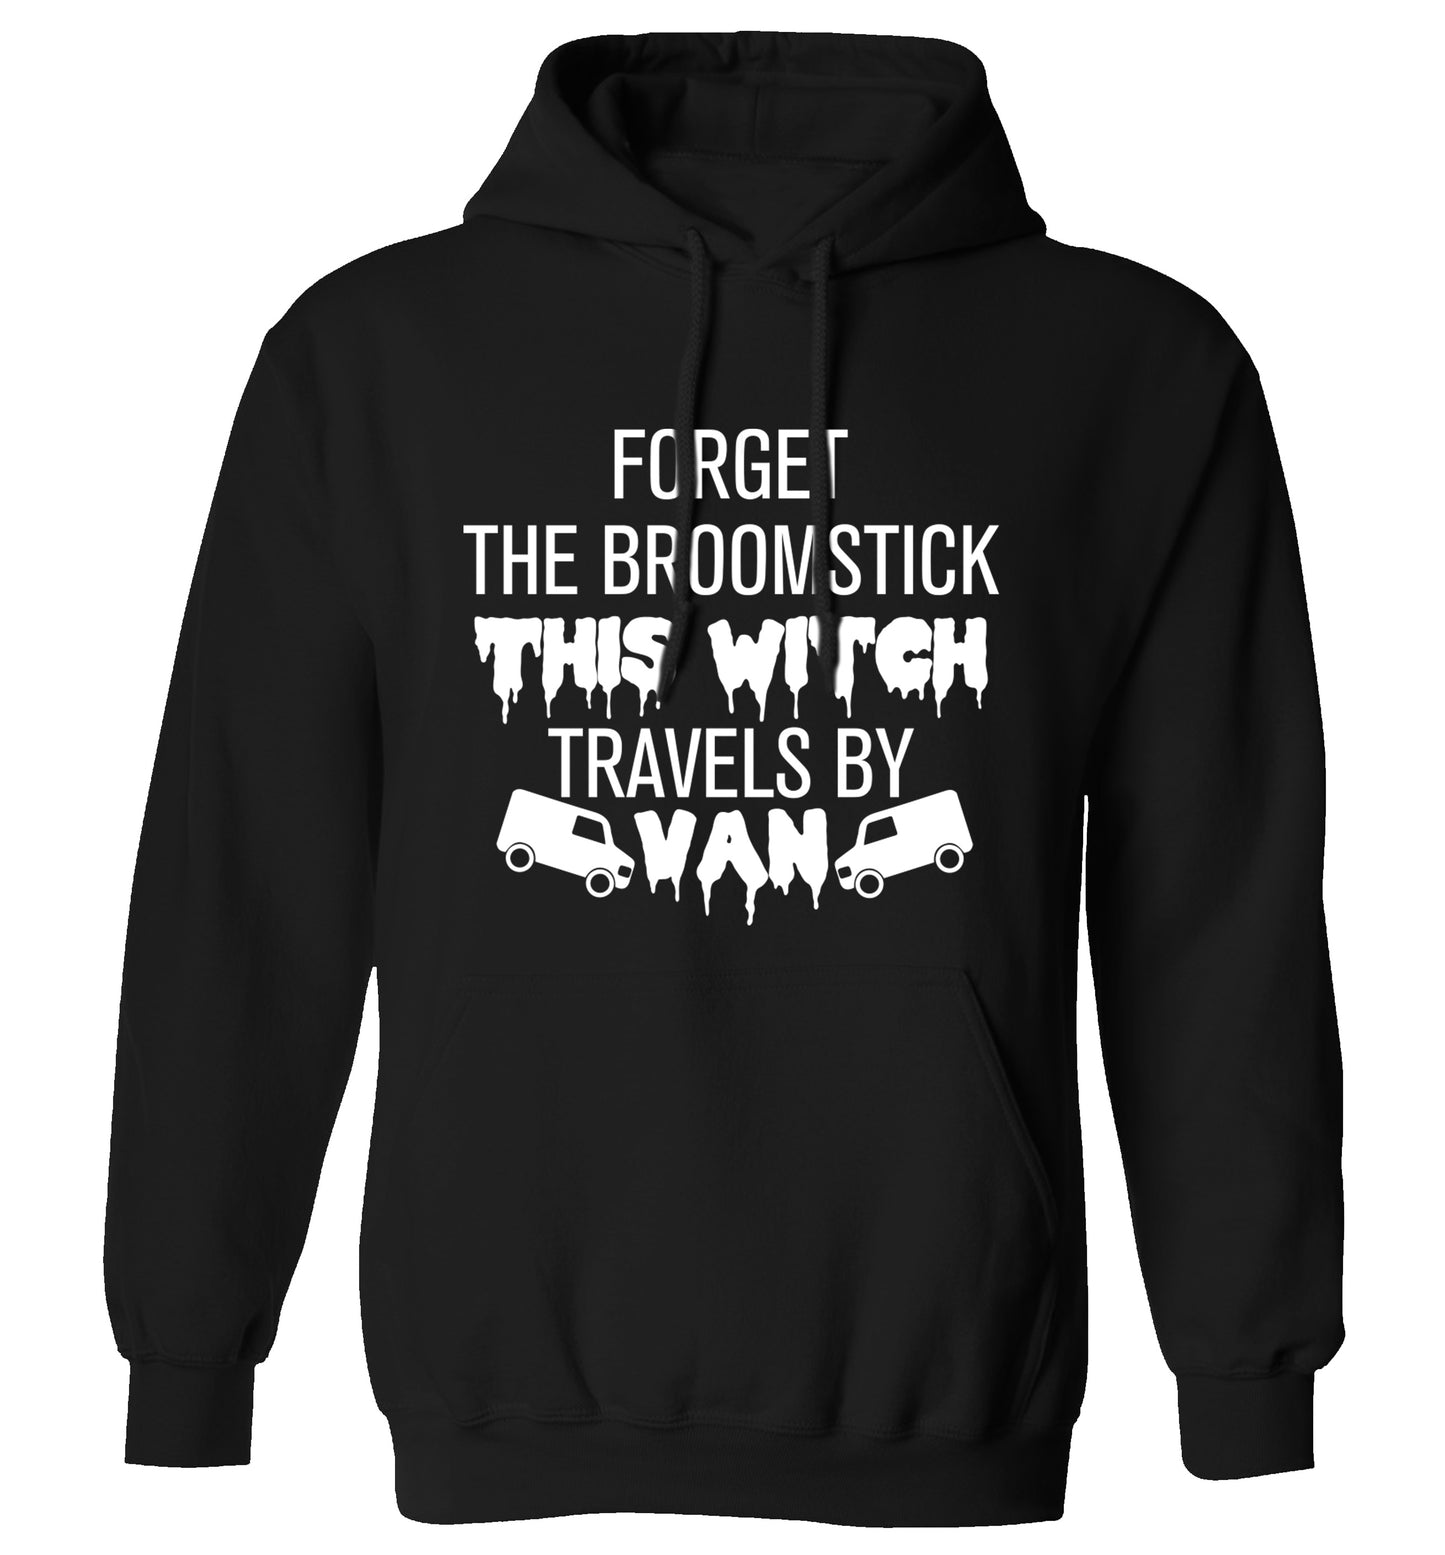 Forget the broomstick this witch travels by van adults unisexblack hoodie 2XL